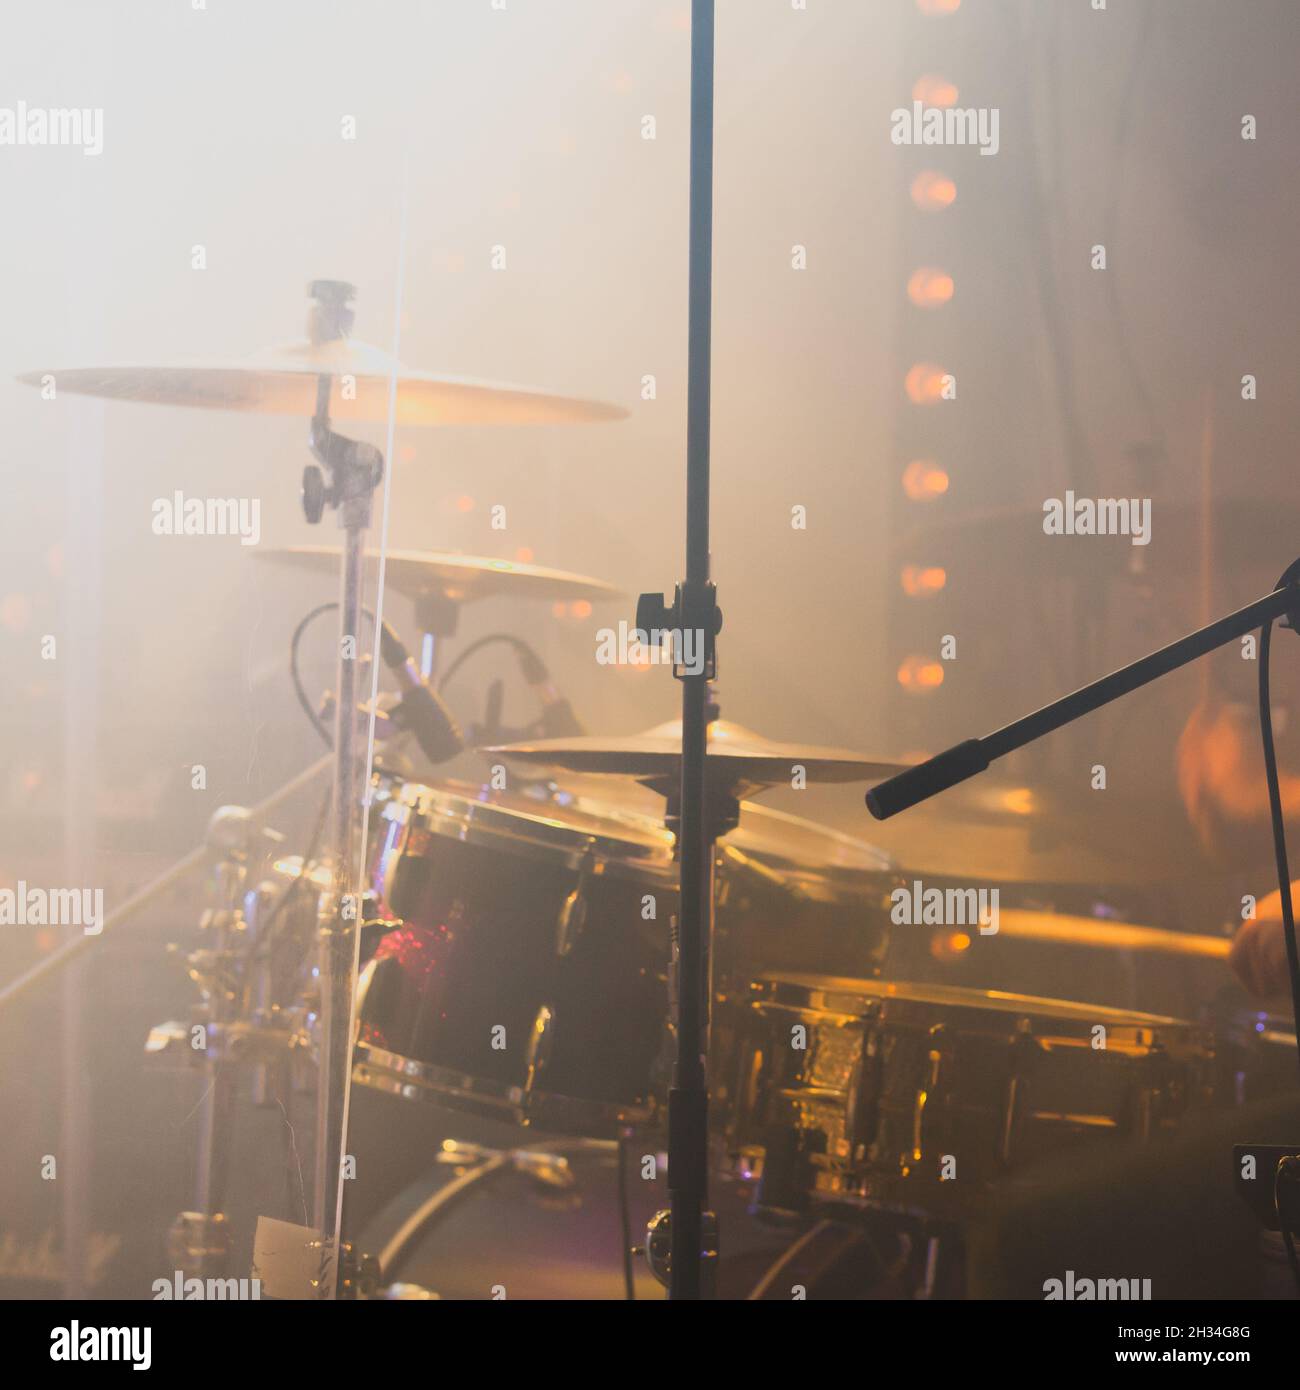 Live rock music photo background, drum set with cymbals in strobe lights. Close-up square photo with soft selective focus Stock Photo